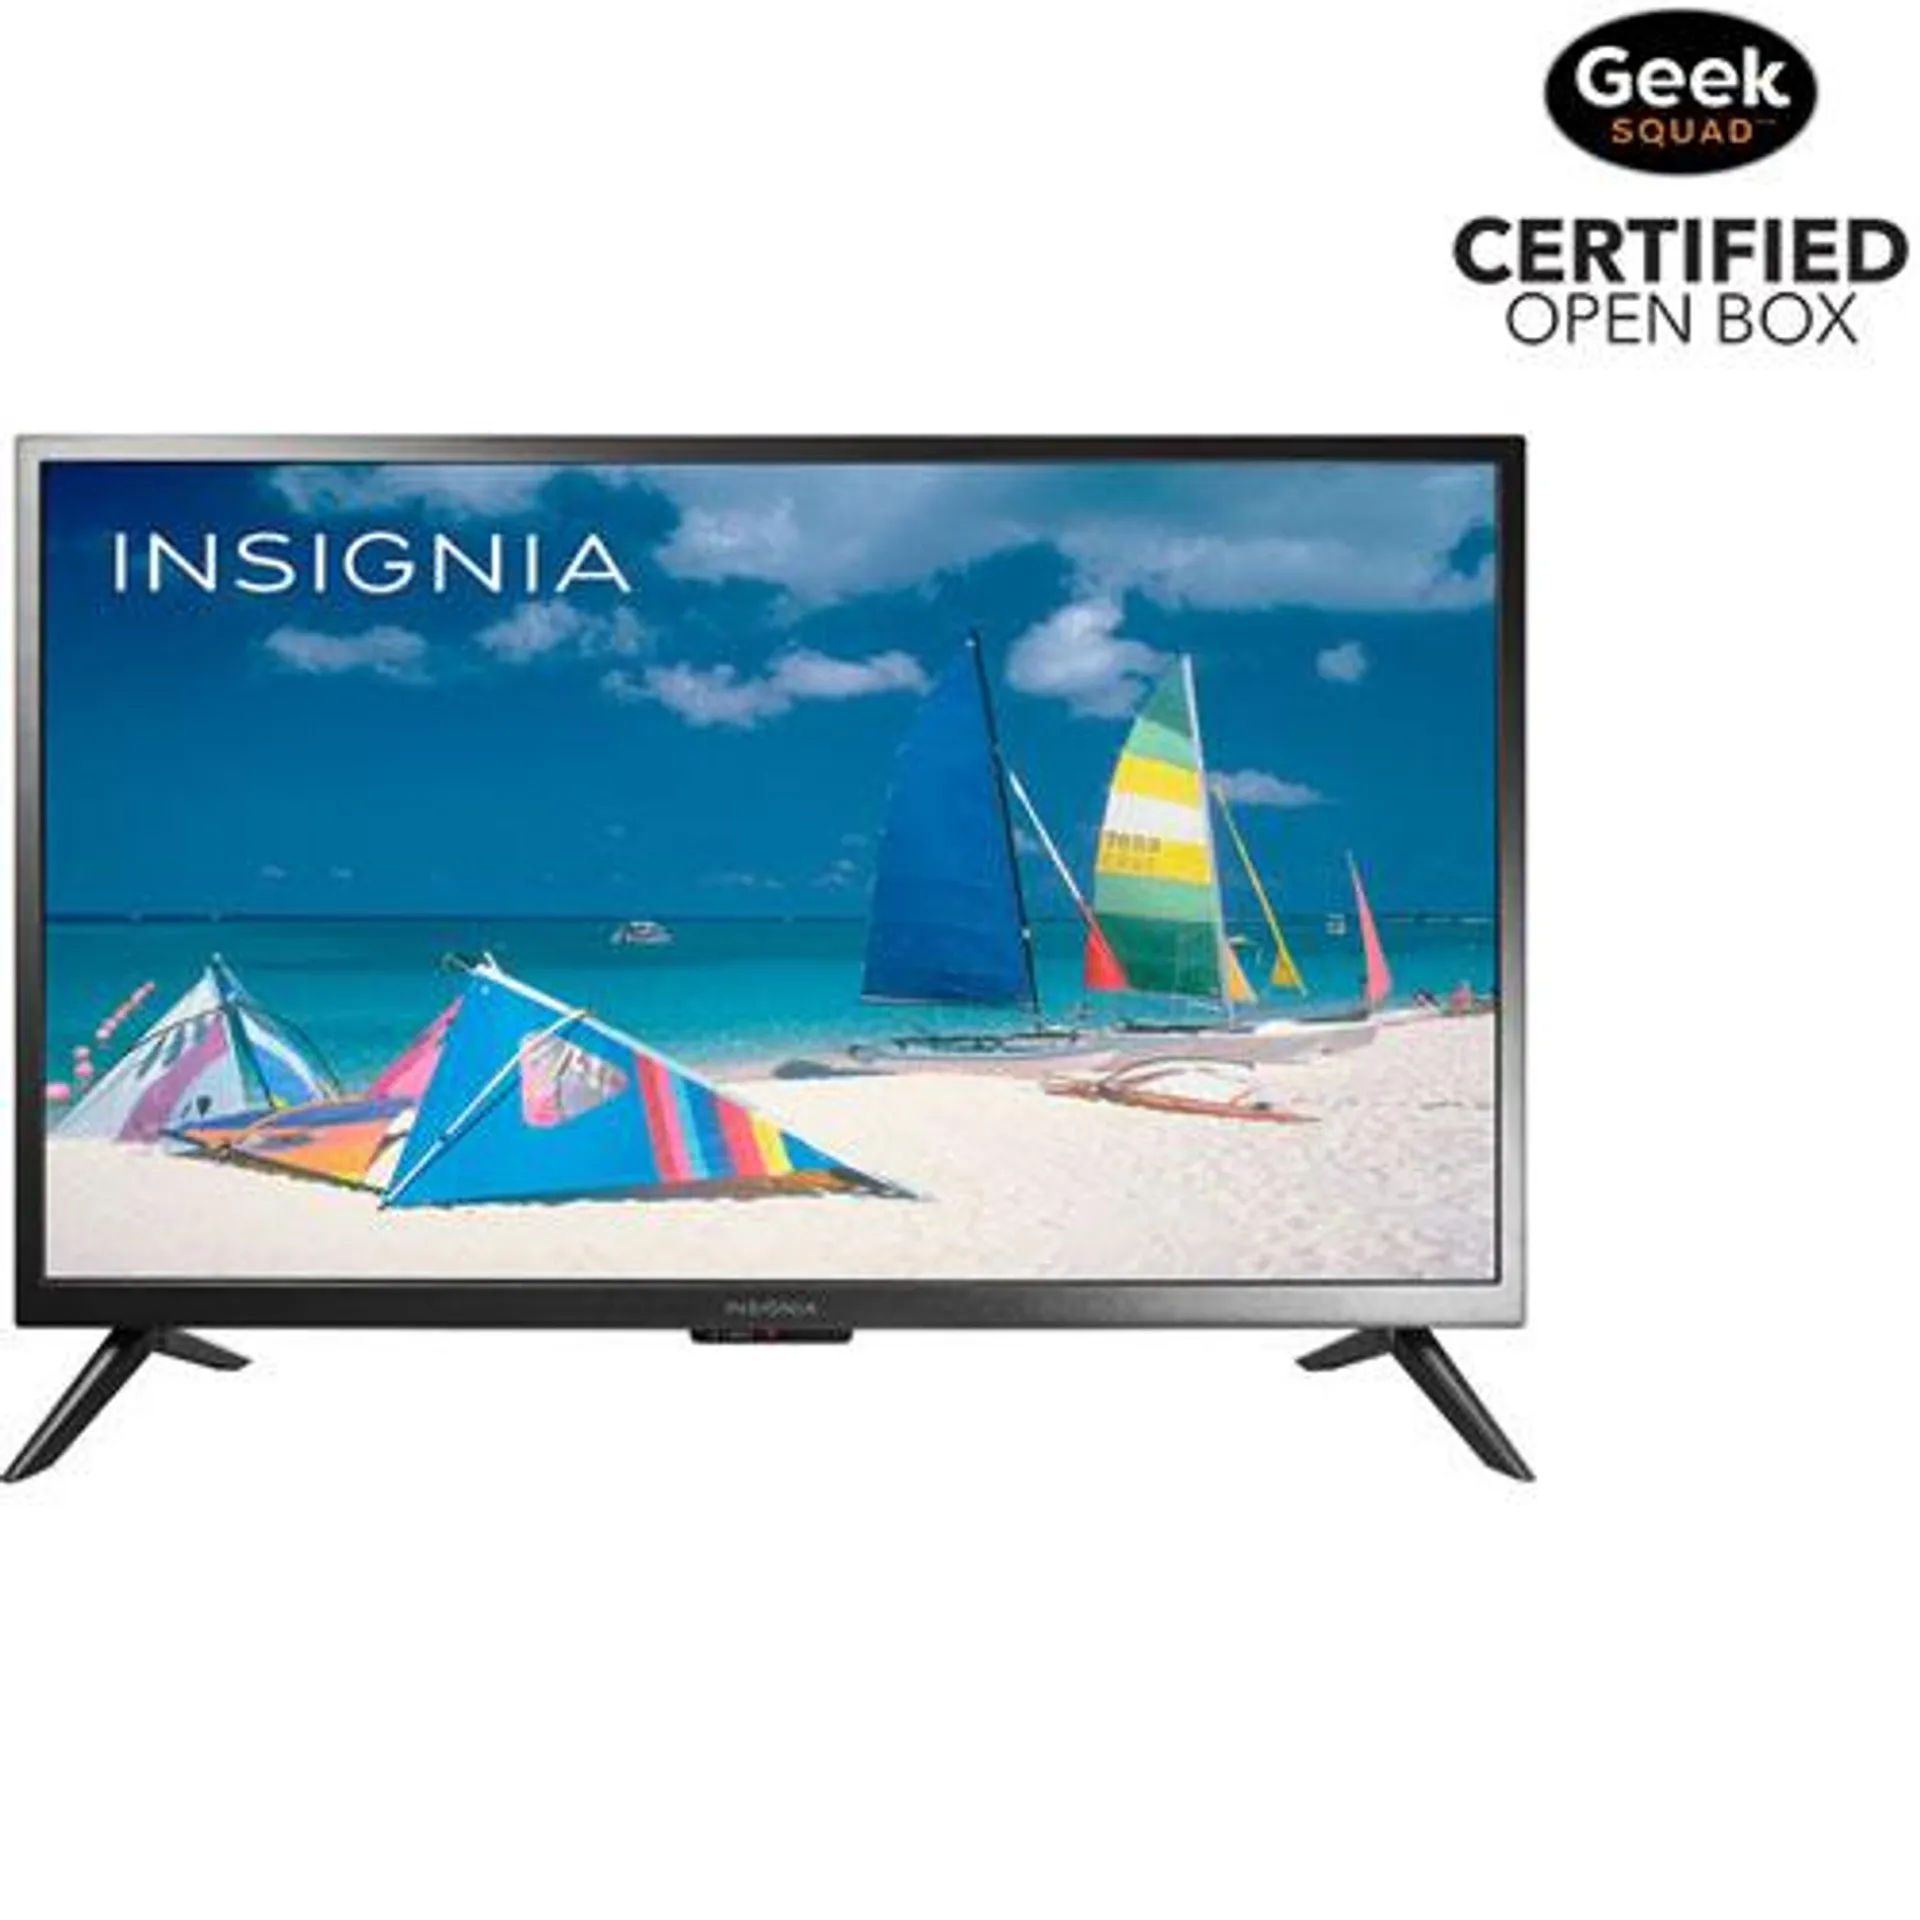 Open Box - Insignia 32" 720p HD LED TV (NS-32D310CA21) - 2020 - Only at Best Buy